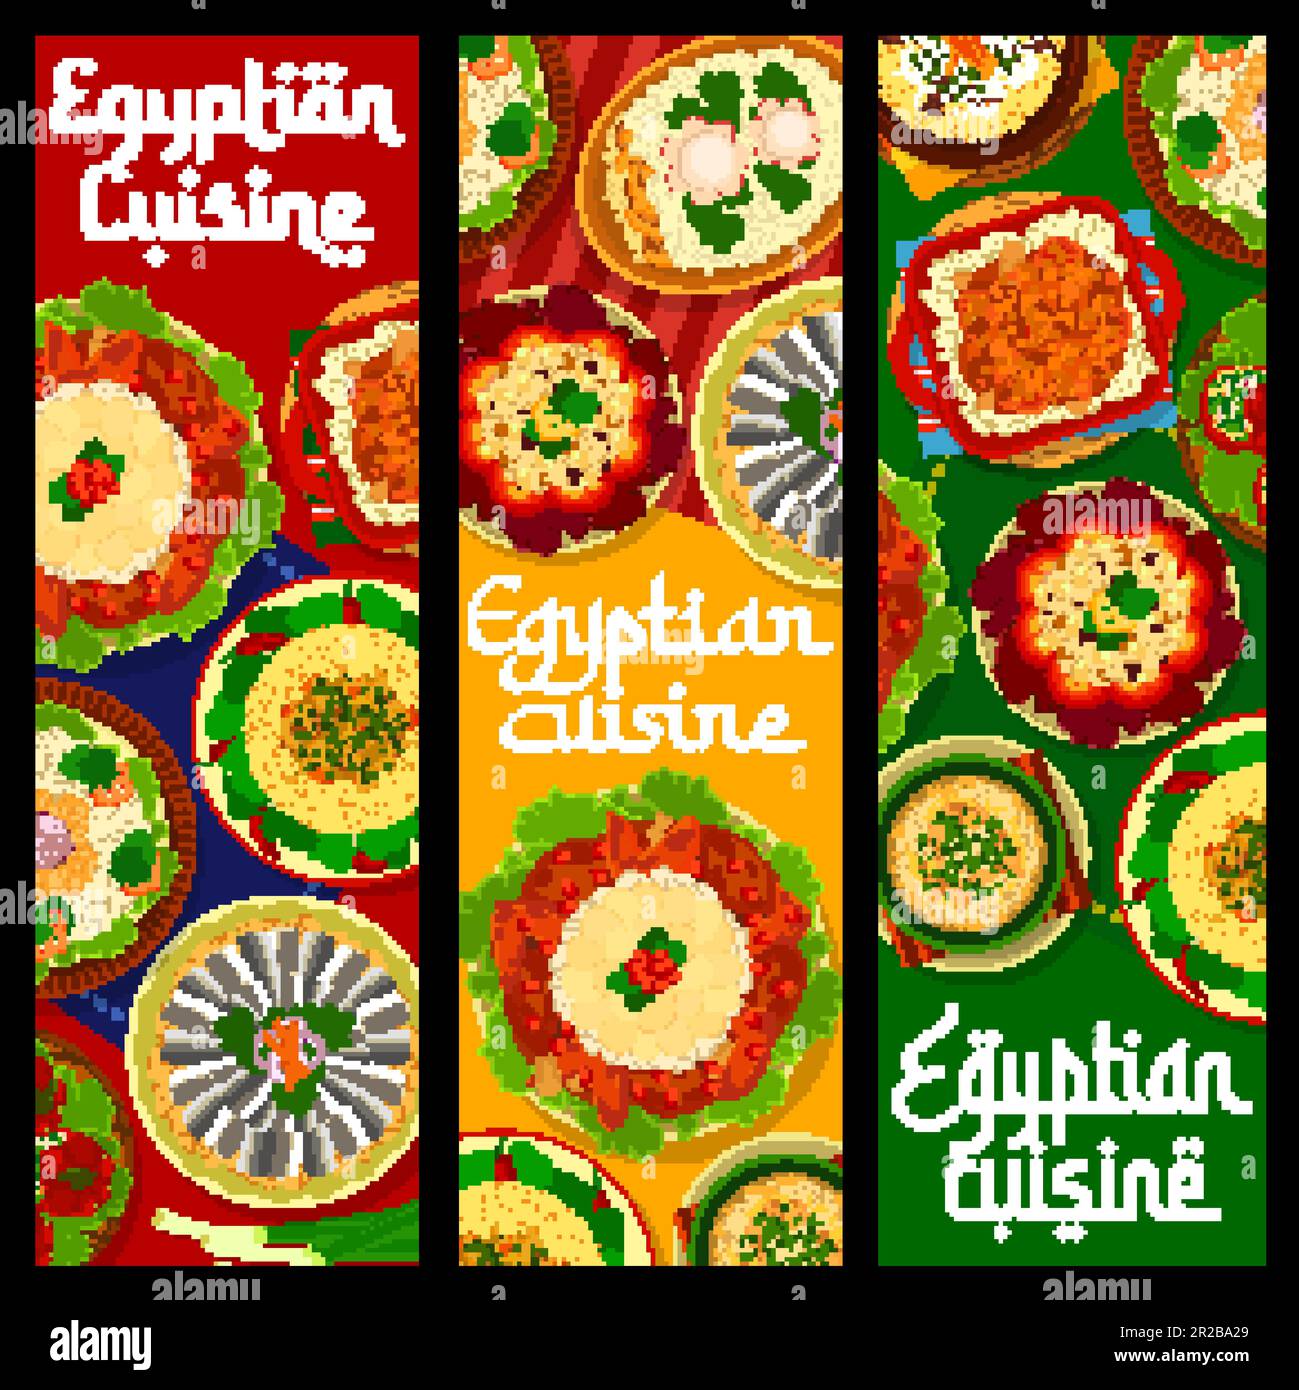 Egyptian cuisine restaurant meals banners, food dishes of Egypt restaurant, vector. Egyptian cuisine traditional lunch and dishes of rice, couscous and lentils with lamb meat, chicken and anchovy Stock Vector